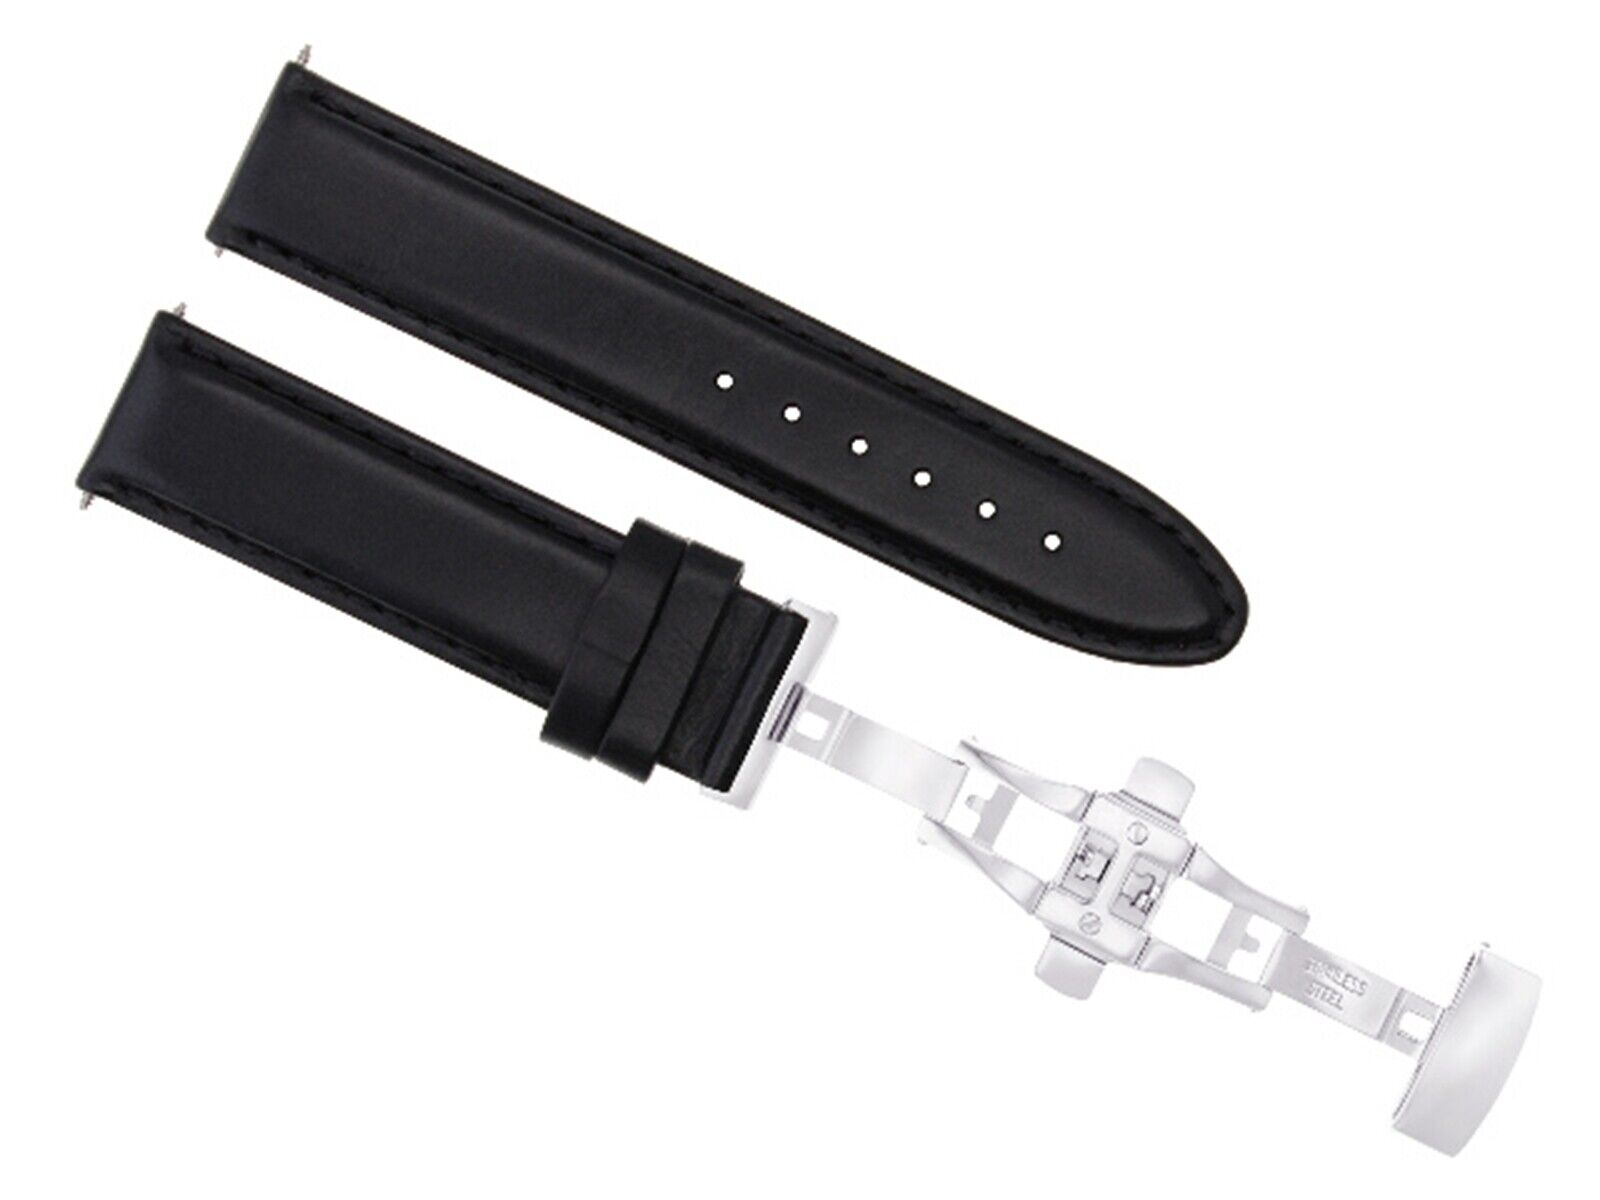 20MM SMOOTH LEATHER WATCH BAND STRAP DEPLOYMENT CLASP BRACELET FOR BREGUET BLACK